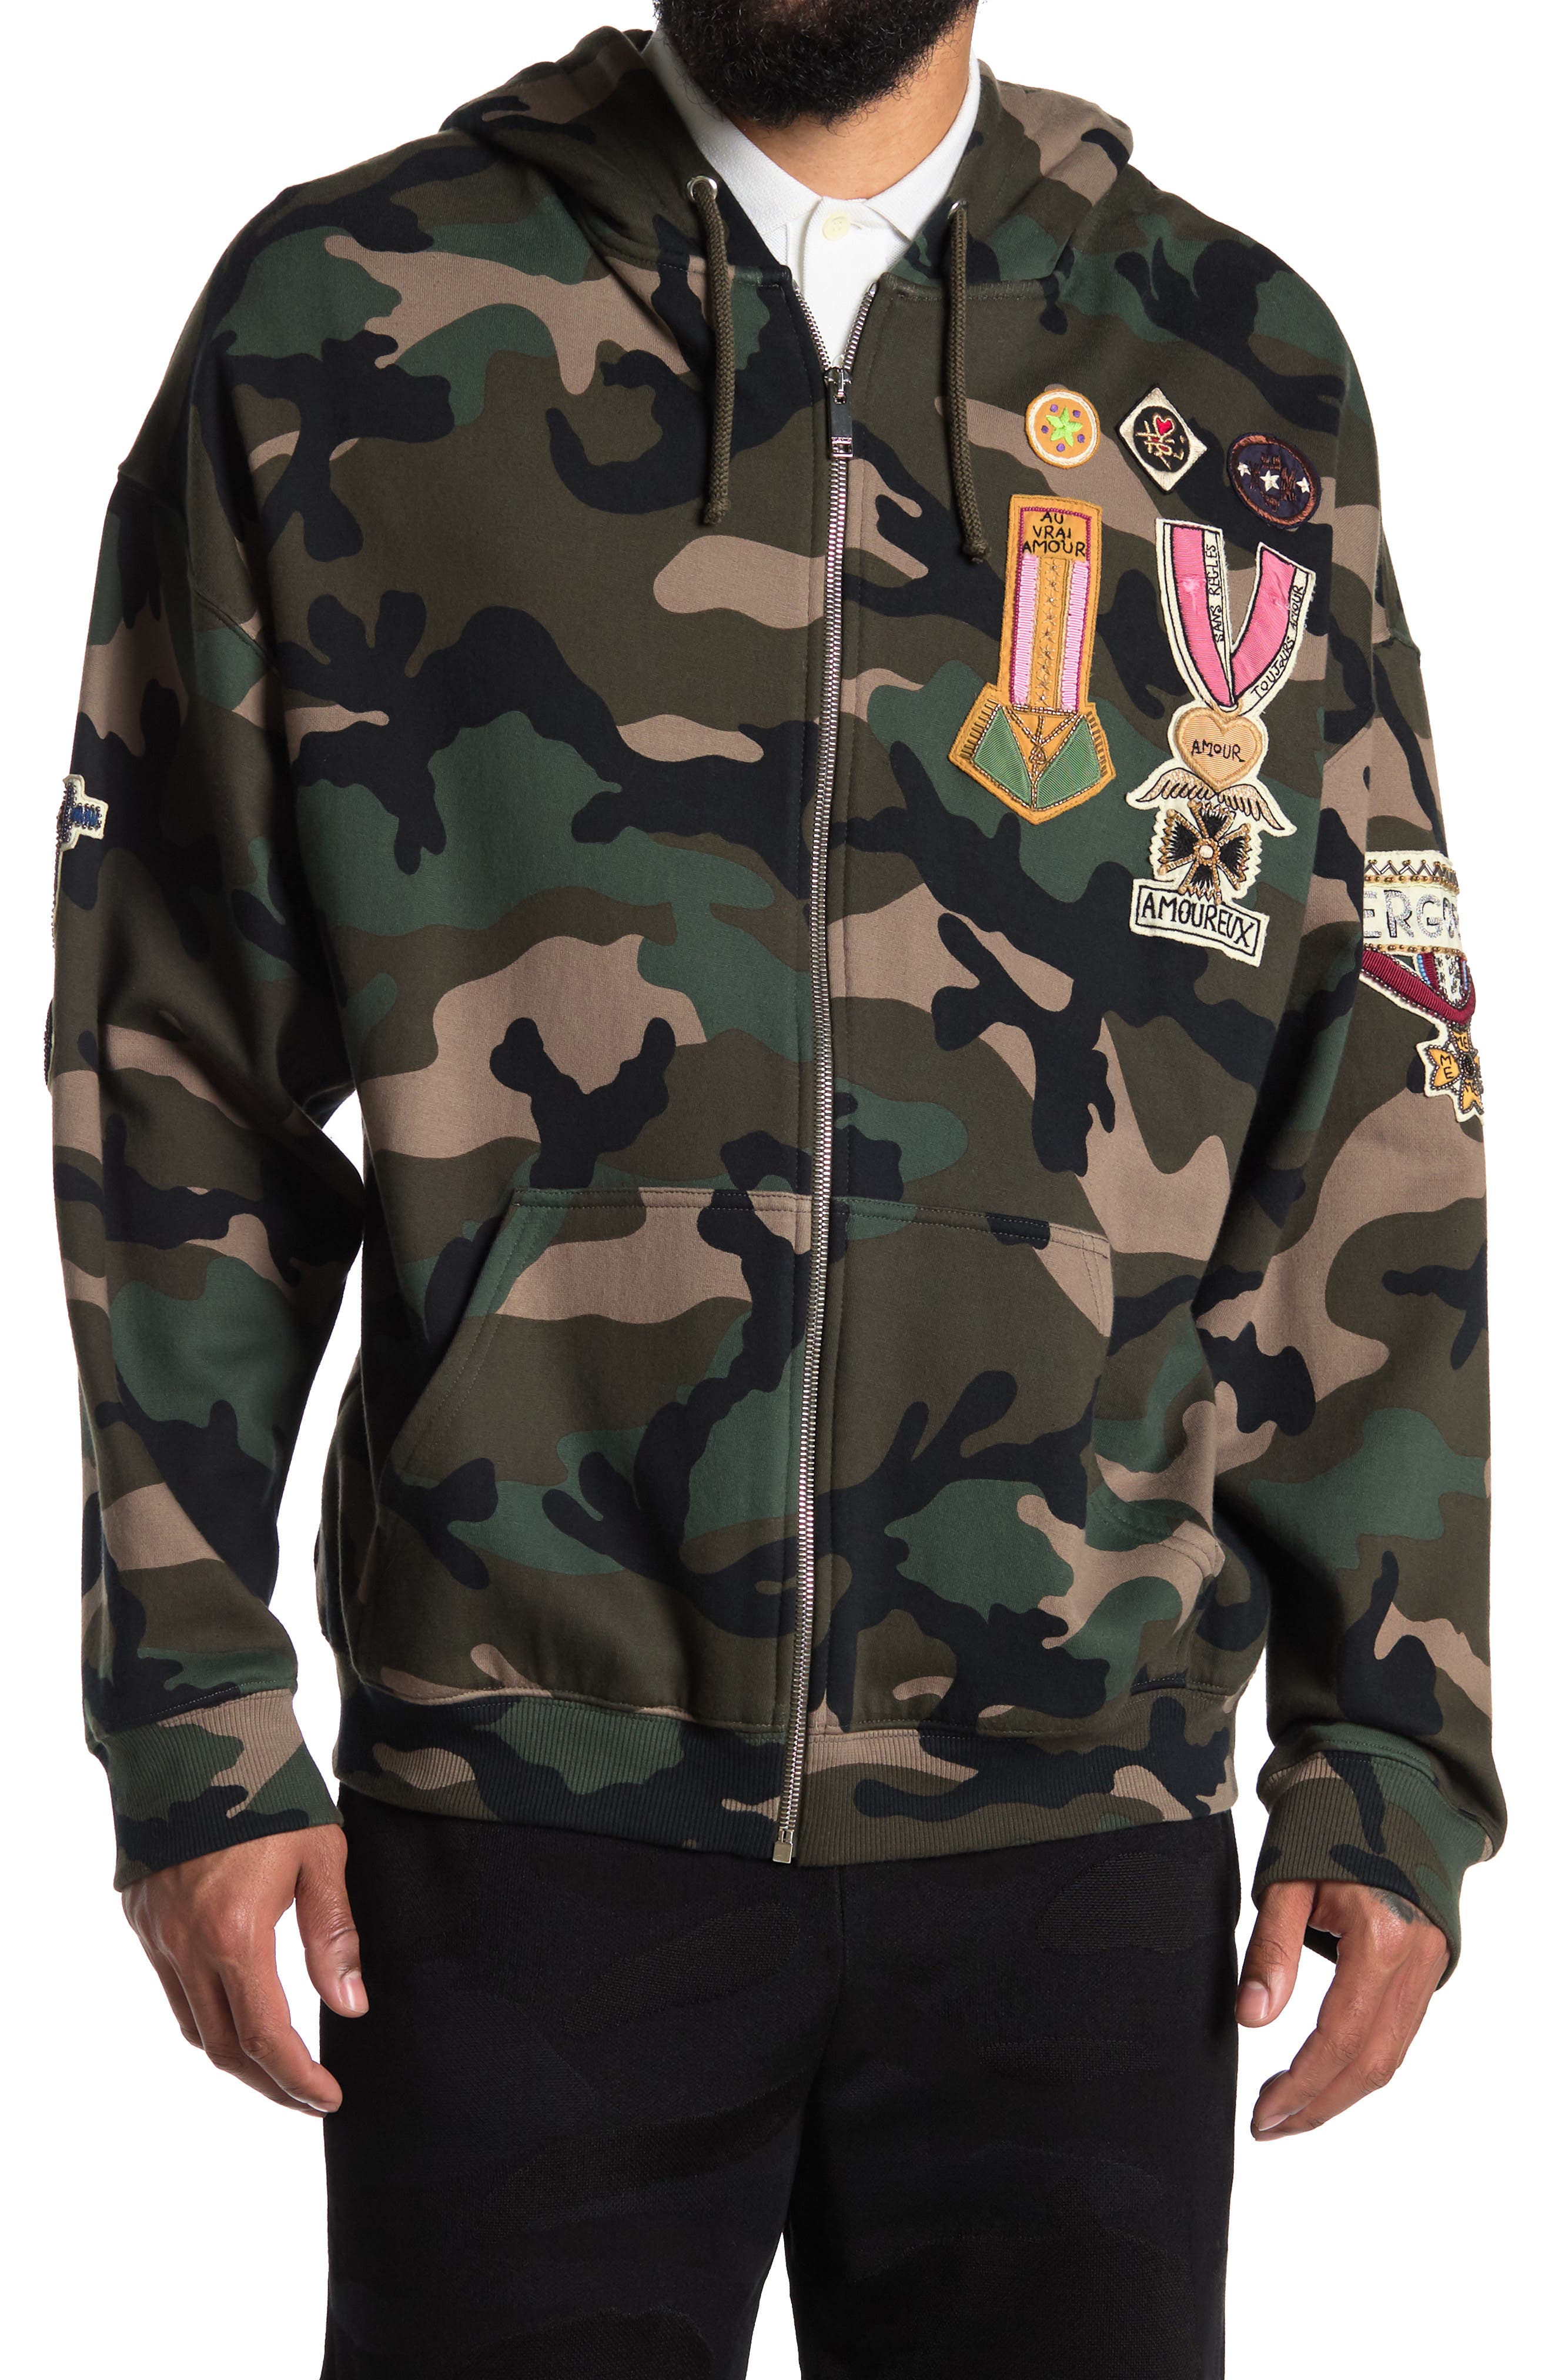 Valentino Embroidered & Printed Zip Hoodie In Camou Army